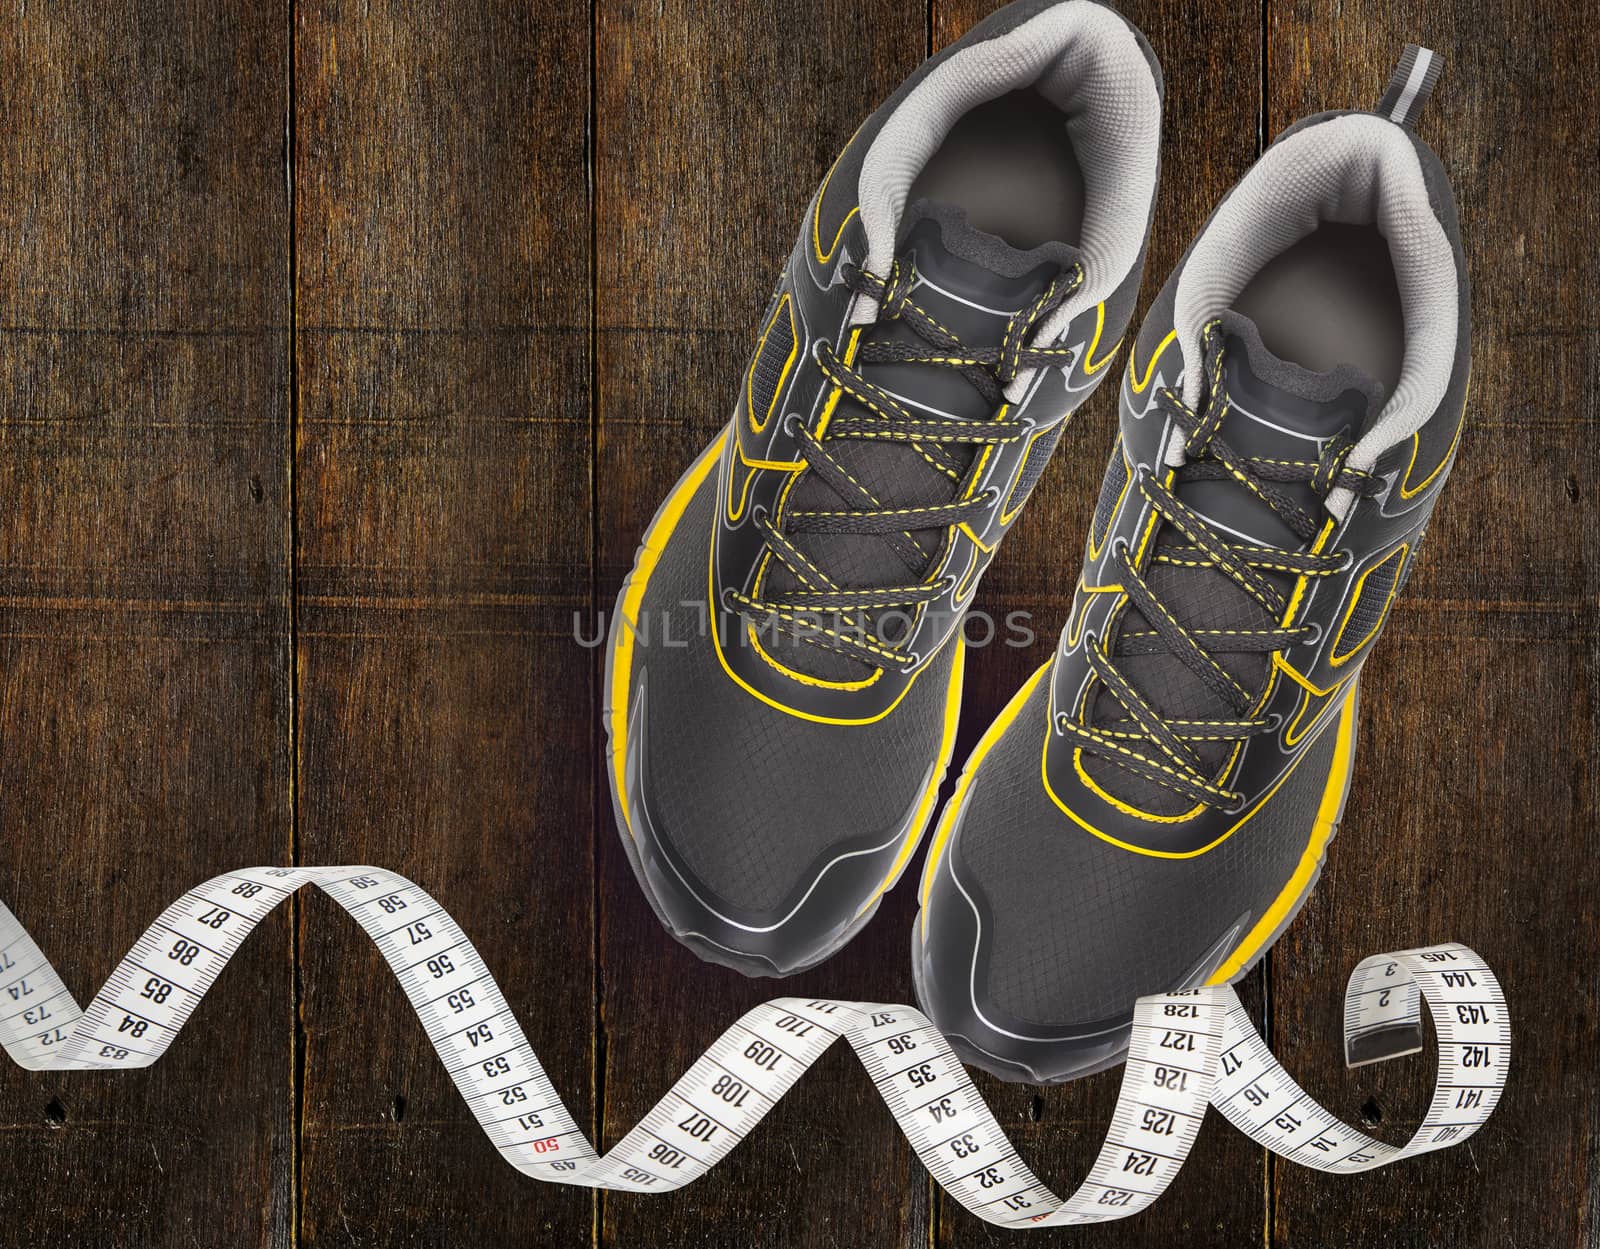 Sport shoes and measuring tape on wooden background by SlayCer